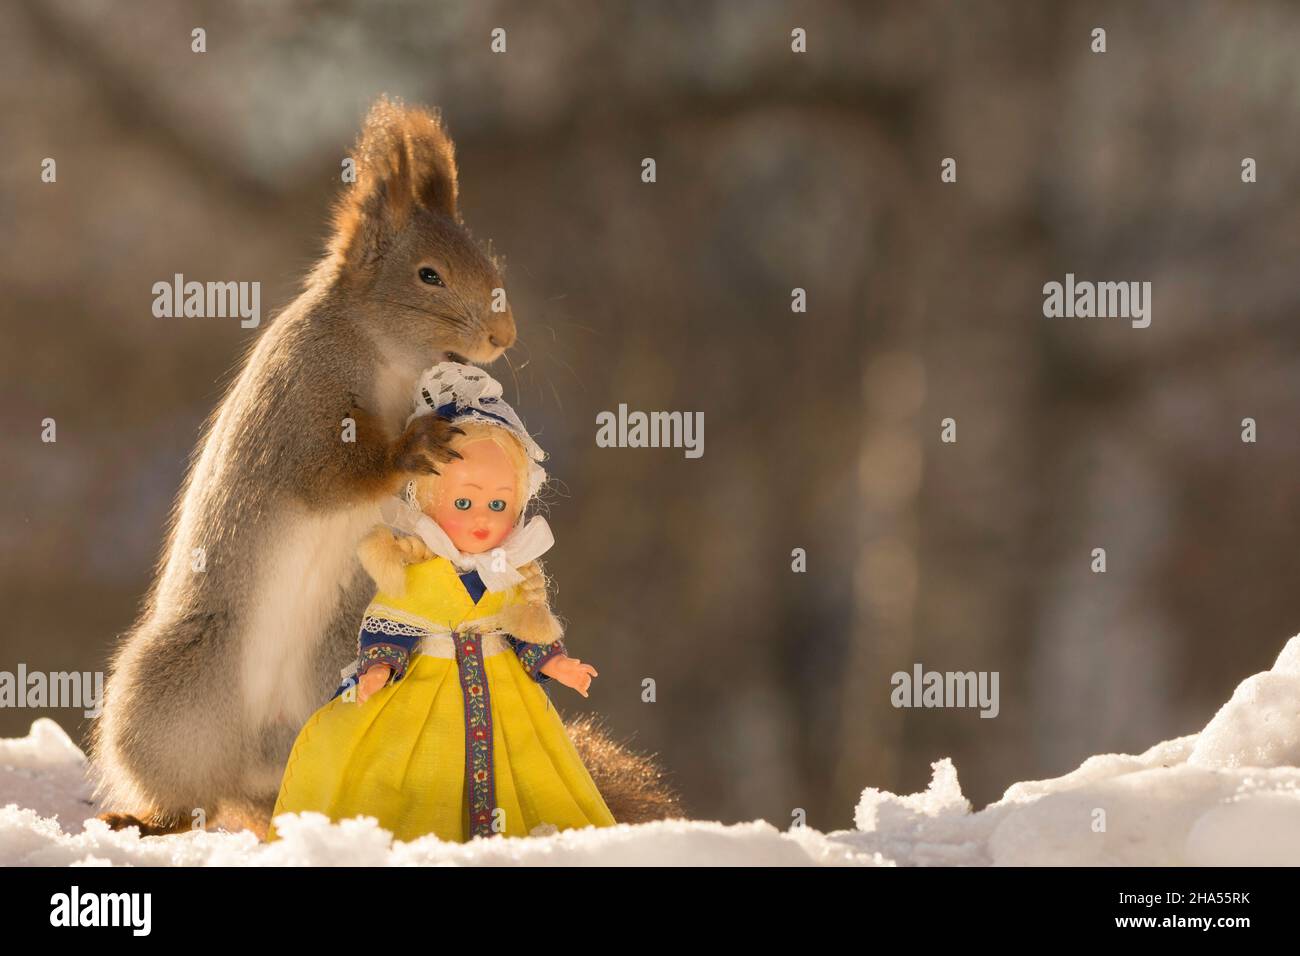 profile and close up of red squirrel on snow with a girl doll in a swedish dress Stock Photo